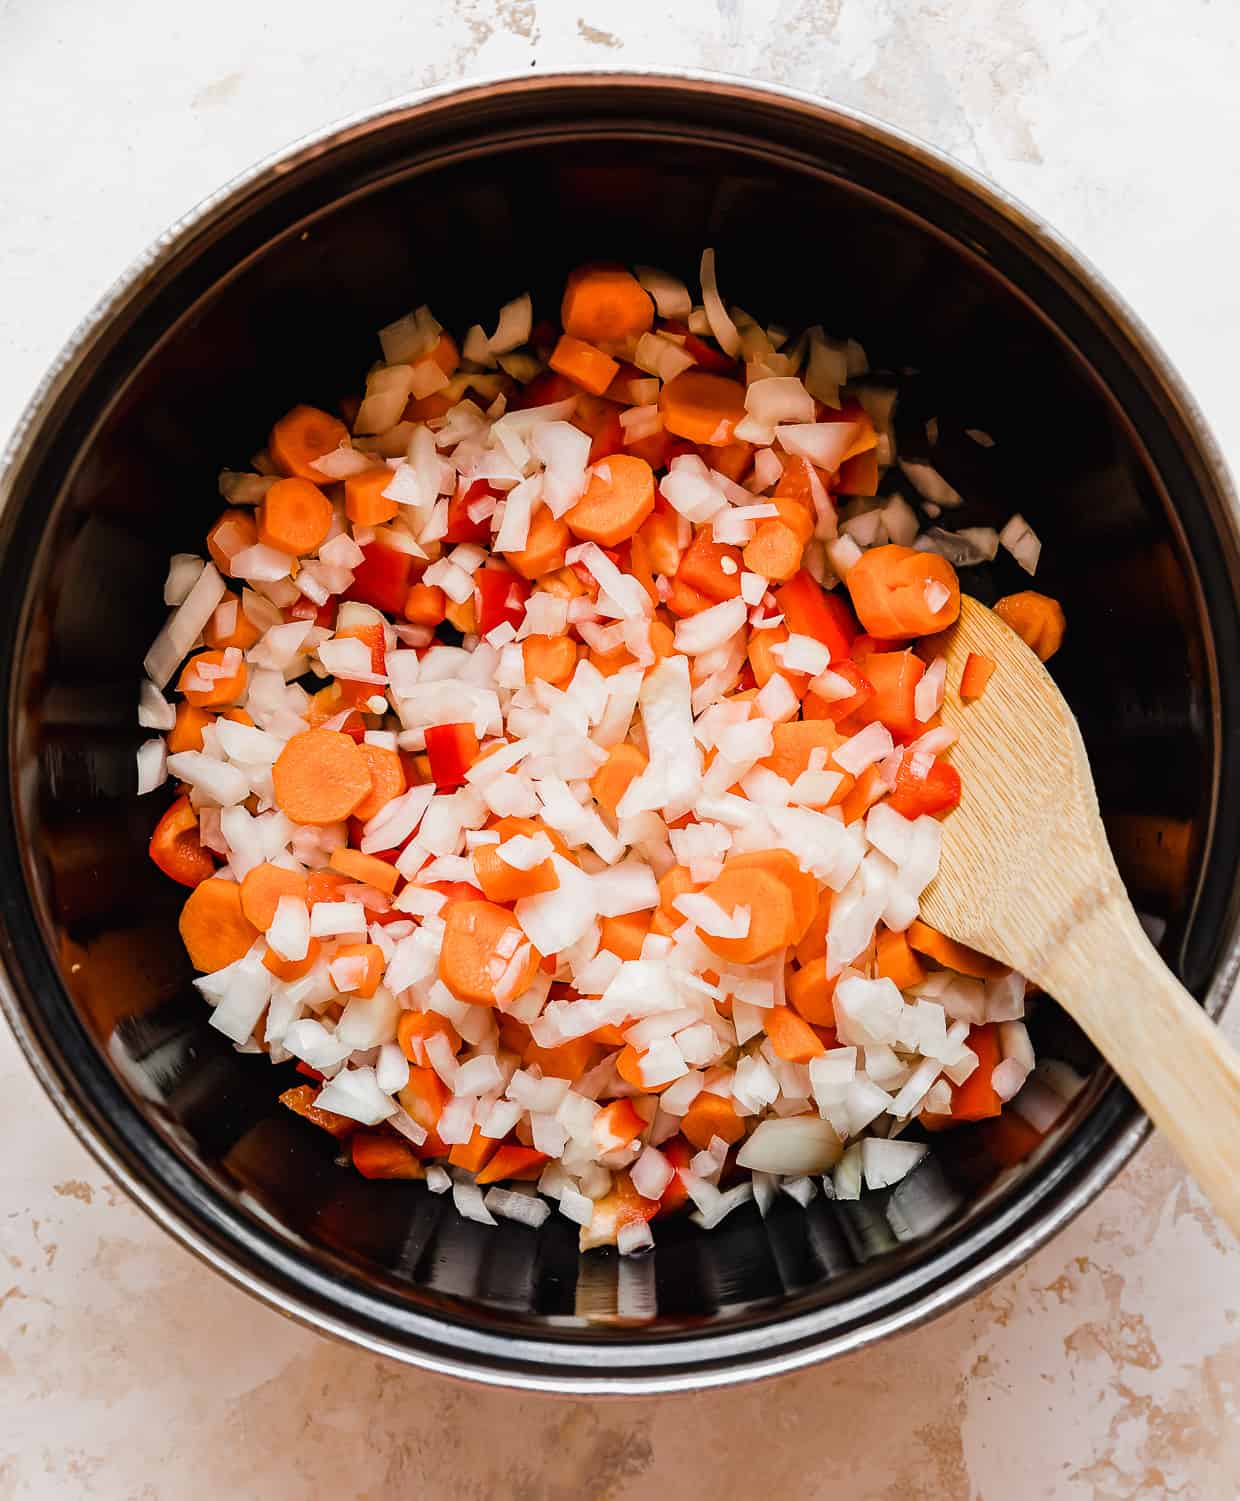 Black pot with chopped onion, red pepper, and carrots in it.